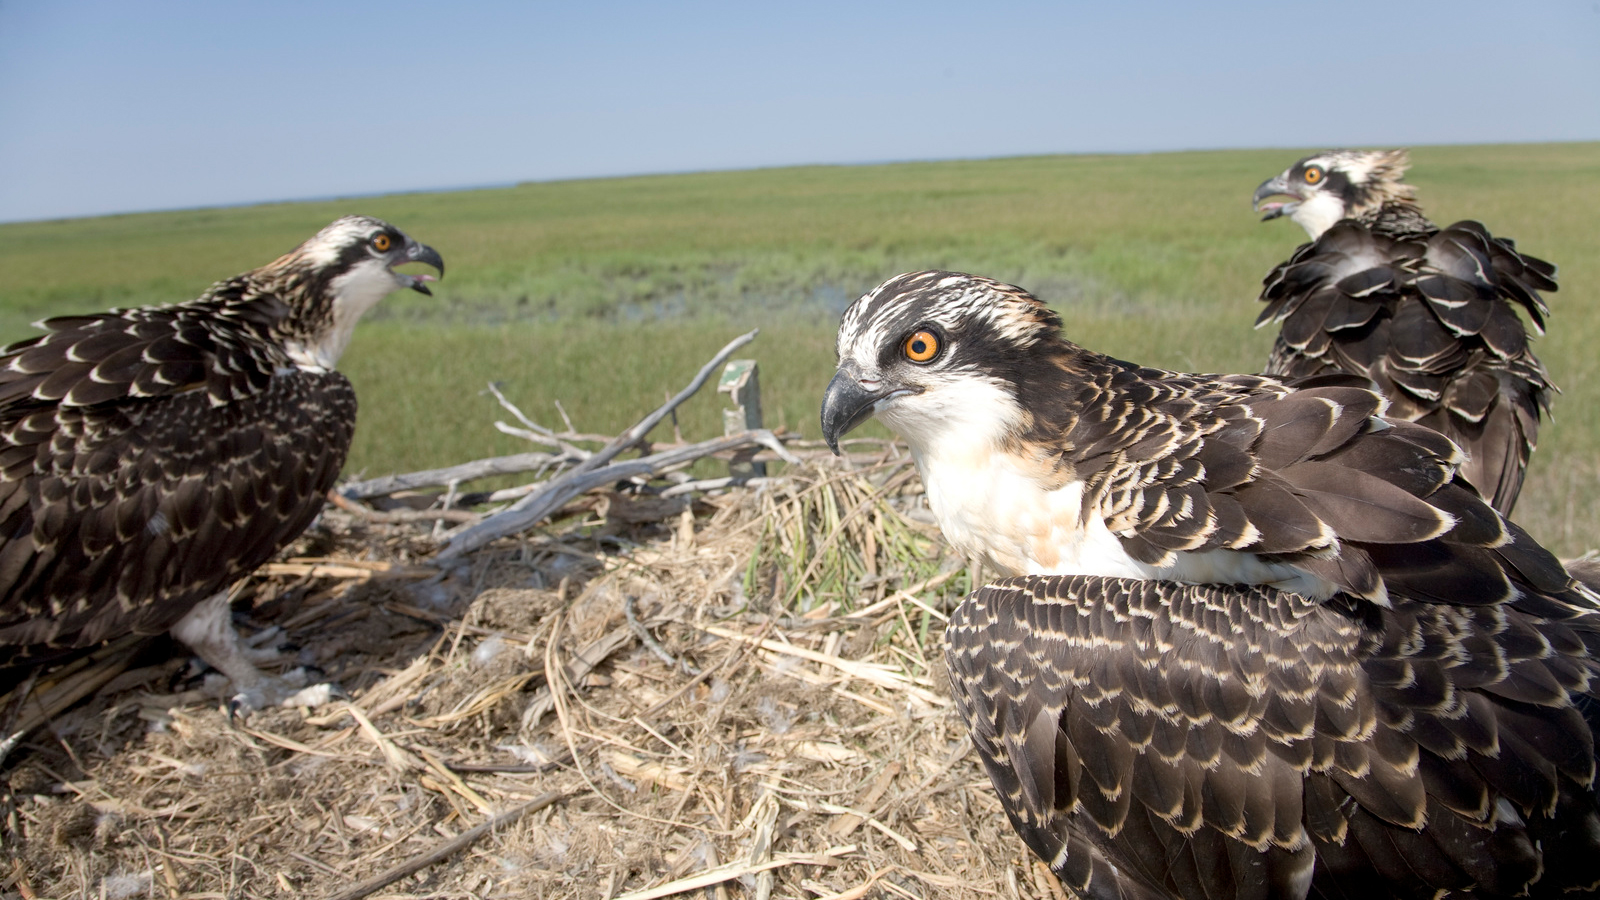 Fledgling ospreys on the nest, learning to fly and fish in preparation for their first migration, at the Eldora Nature Preserve in New Jersey. Photo © Amy Deputy